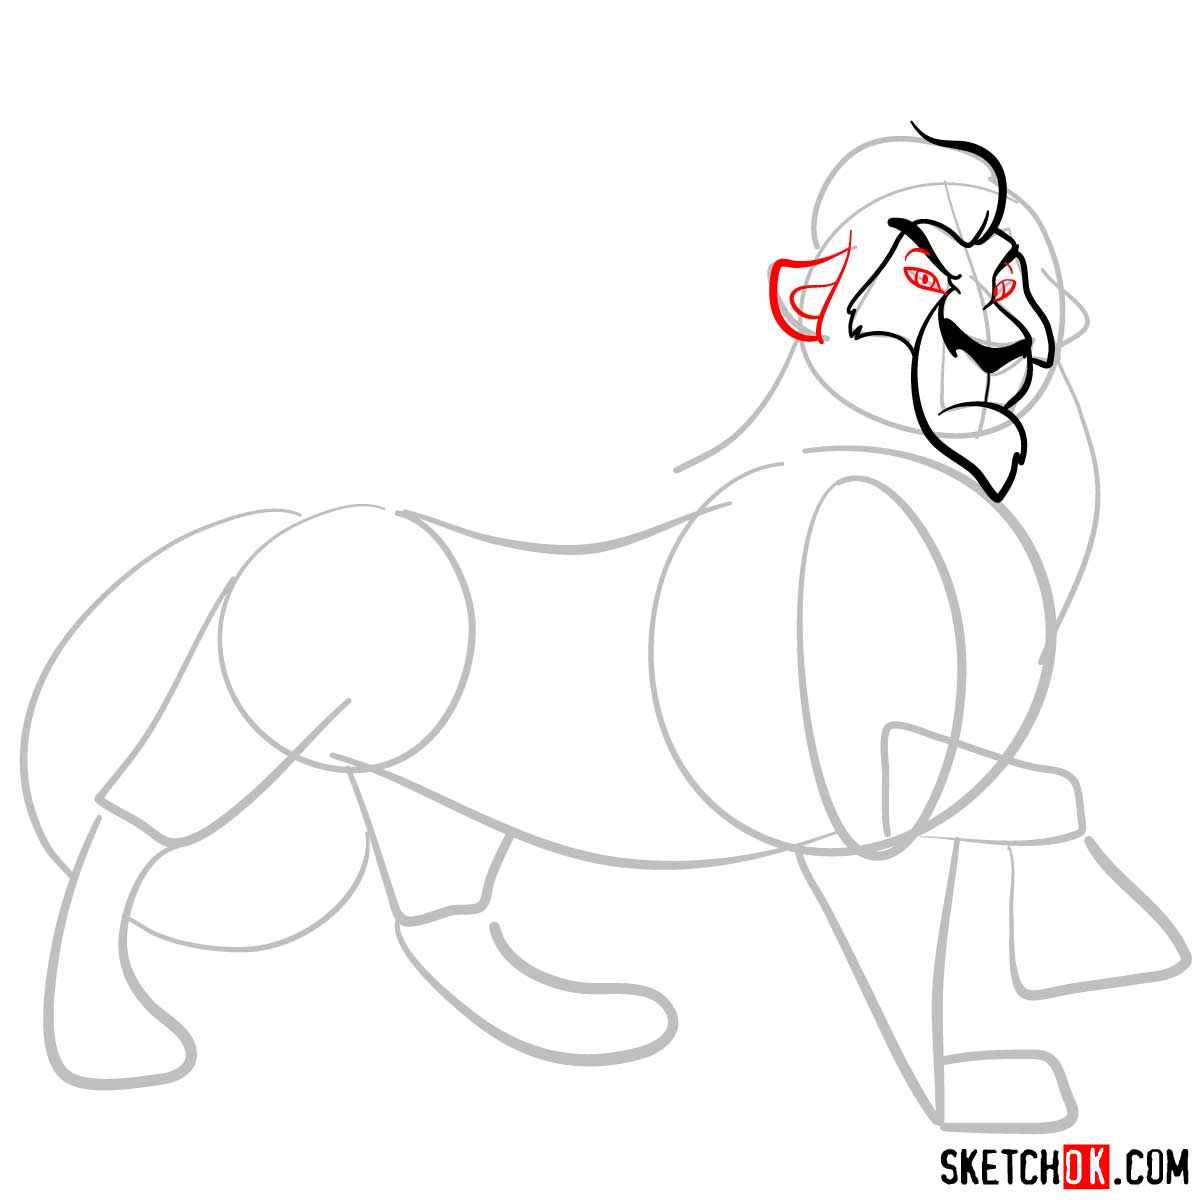 How to draw Scar The Lion King Sketchok easy drawing guides